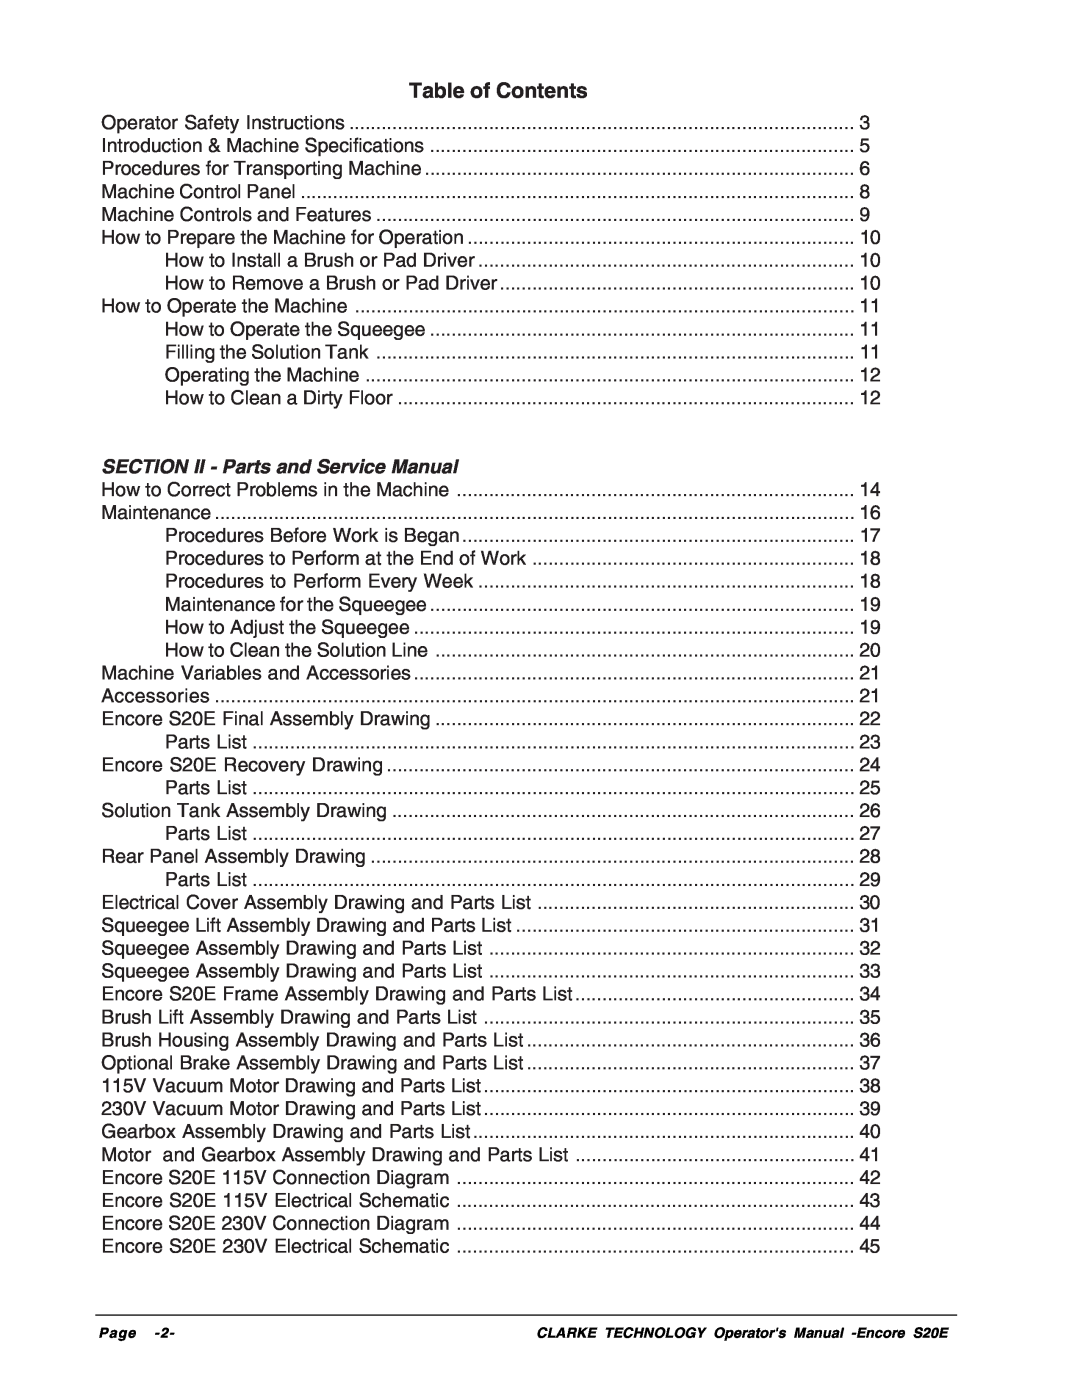 Clarke S20E manual Table of Contents 